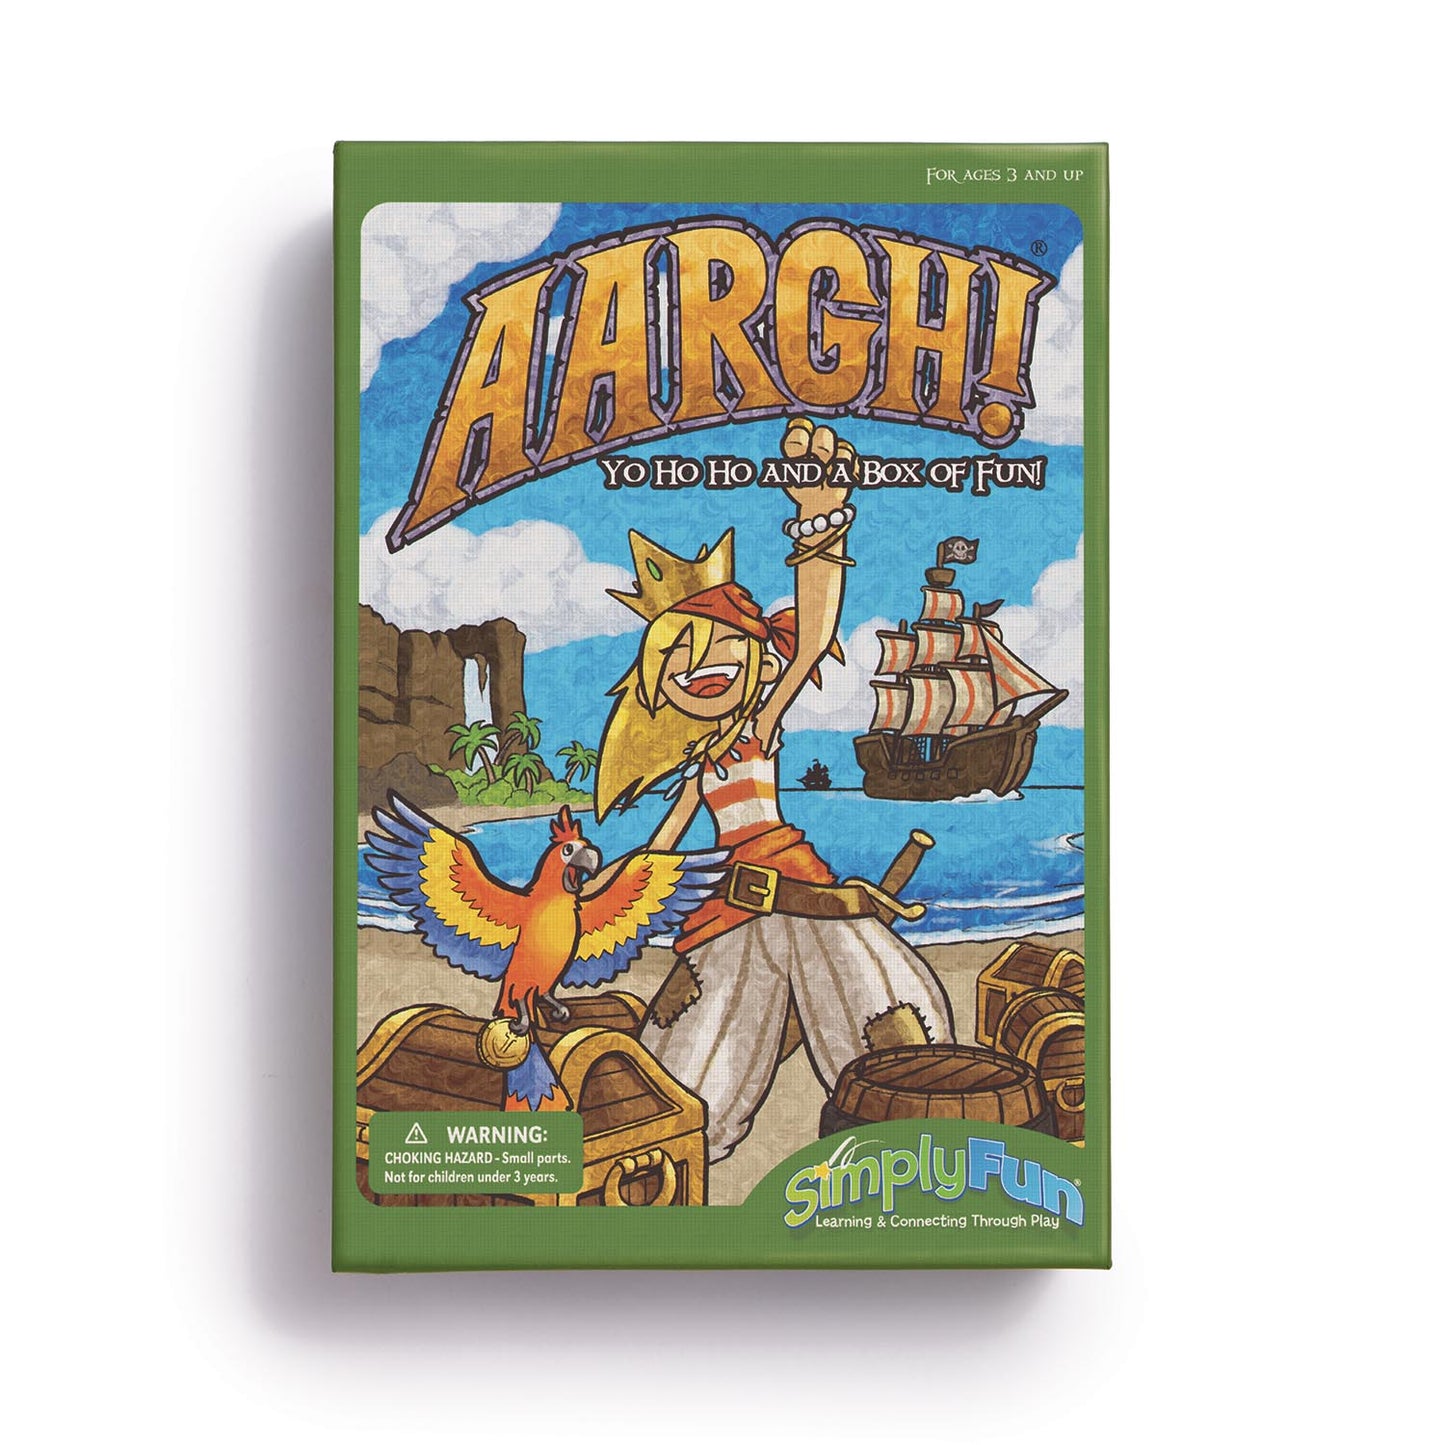 Aargh! educational board game by SimplyFun for kids aged 3 and up